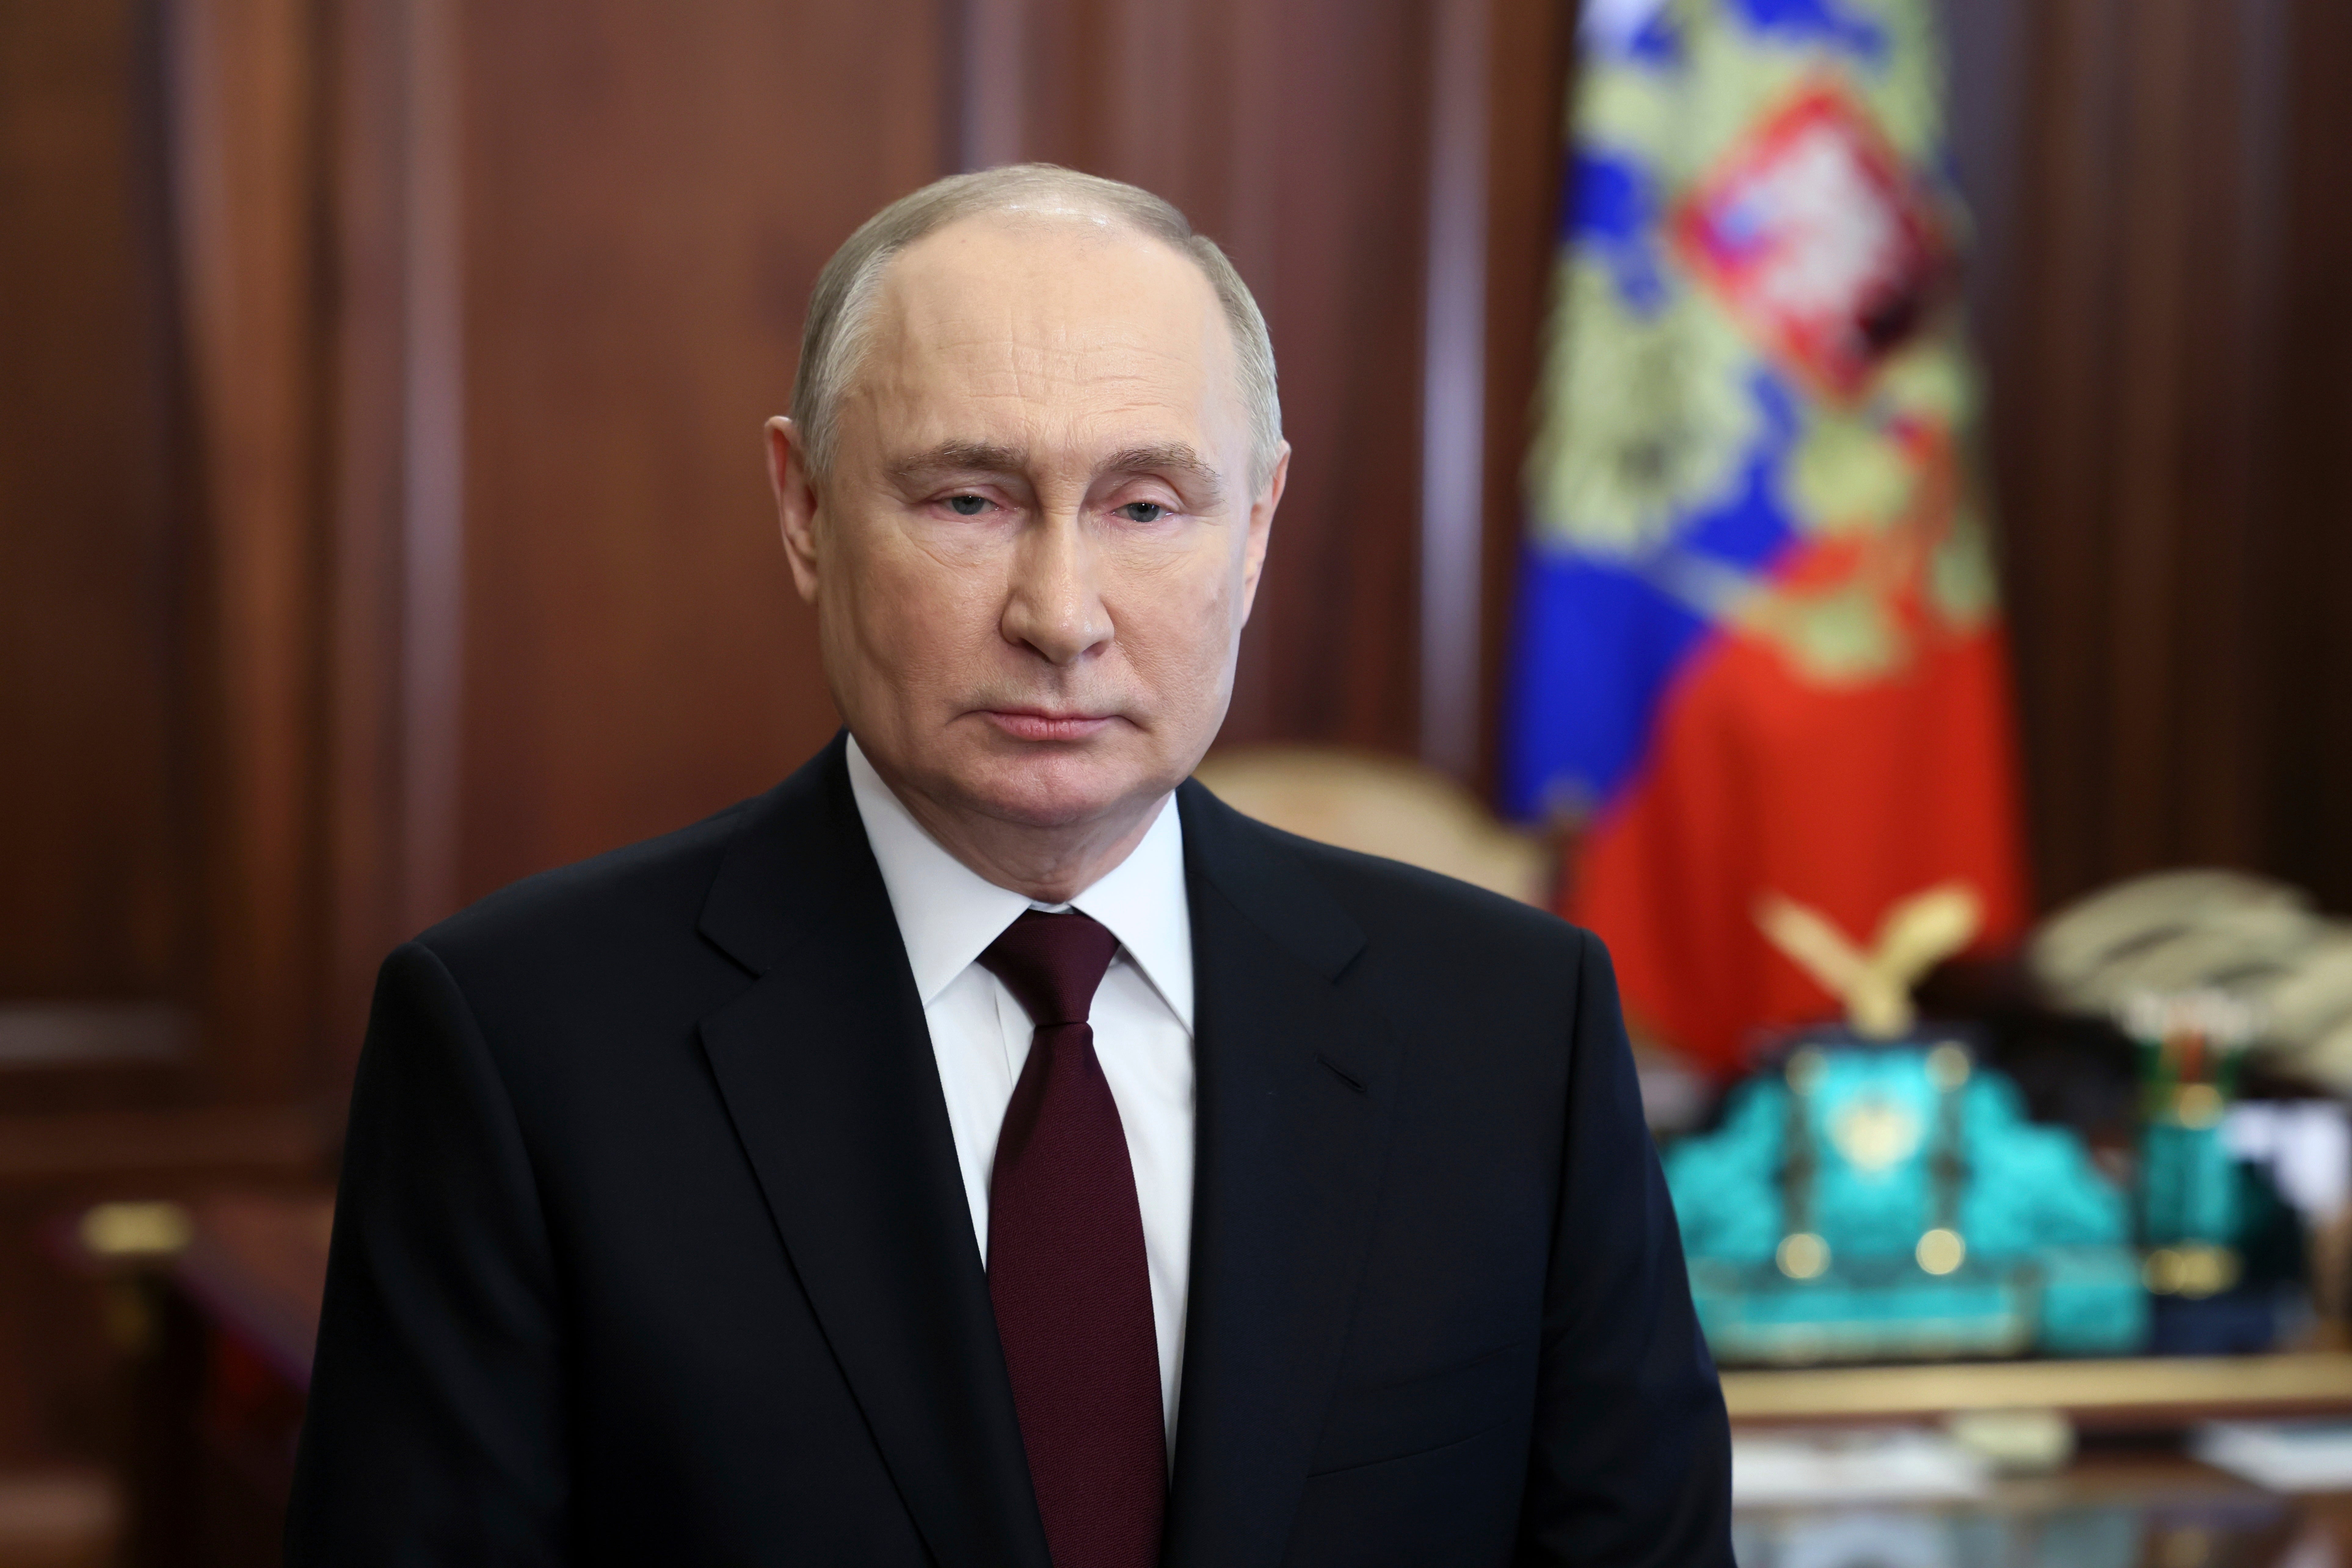 Vladimir Putin is expected to extend his reign this weekend